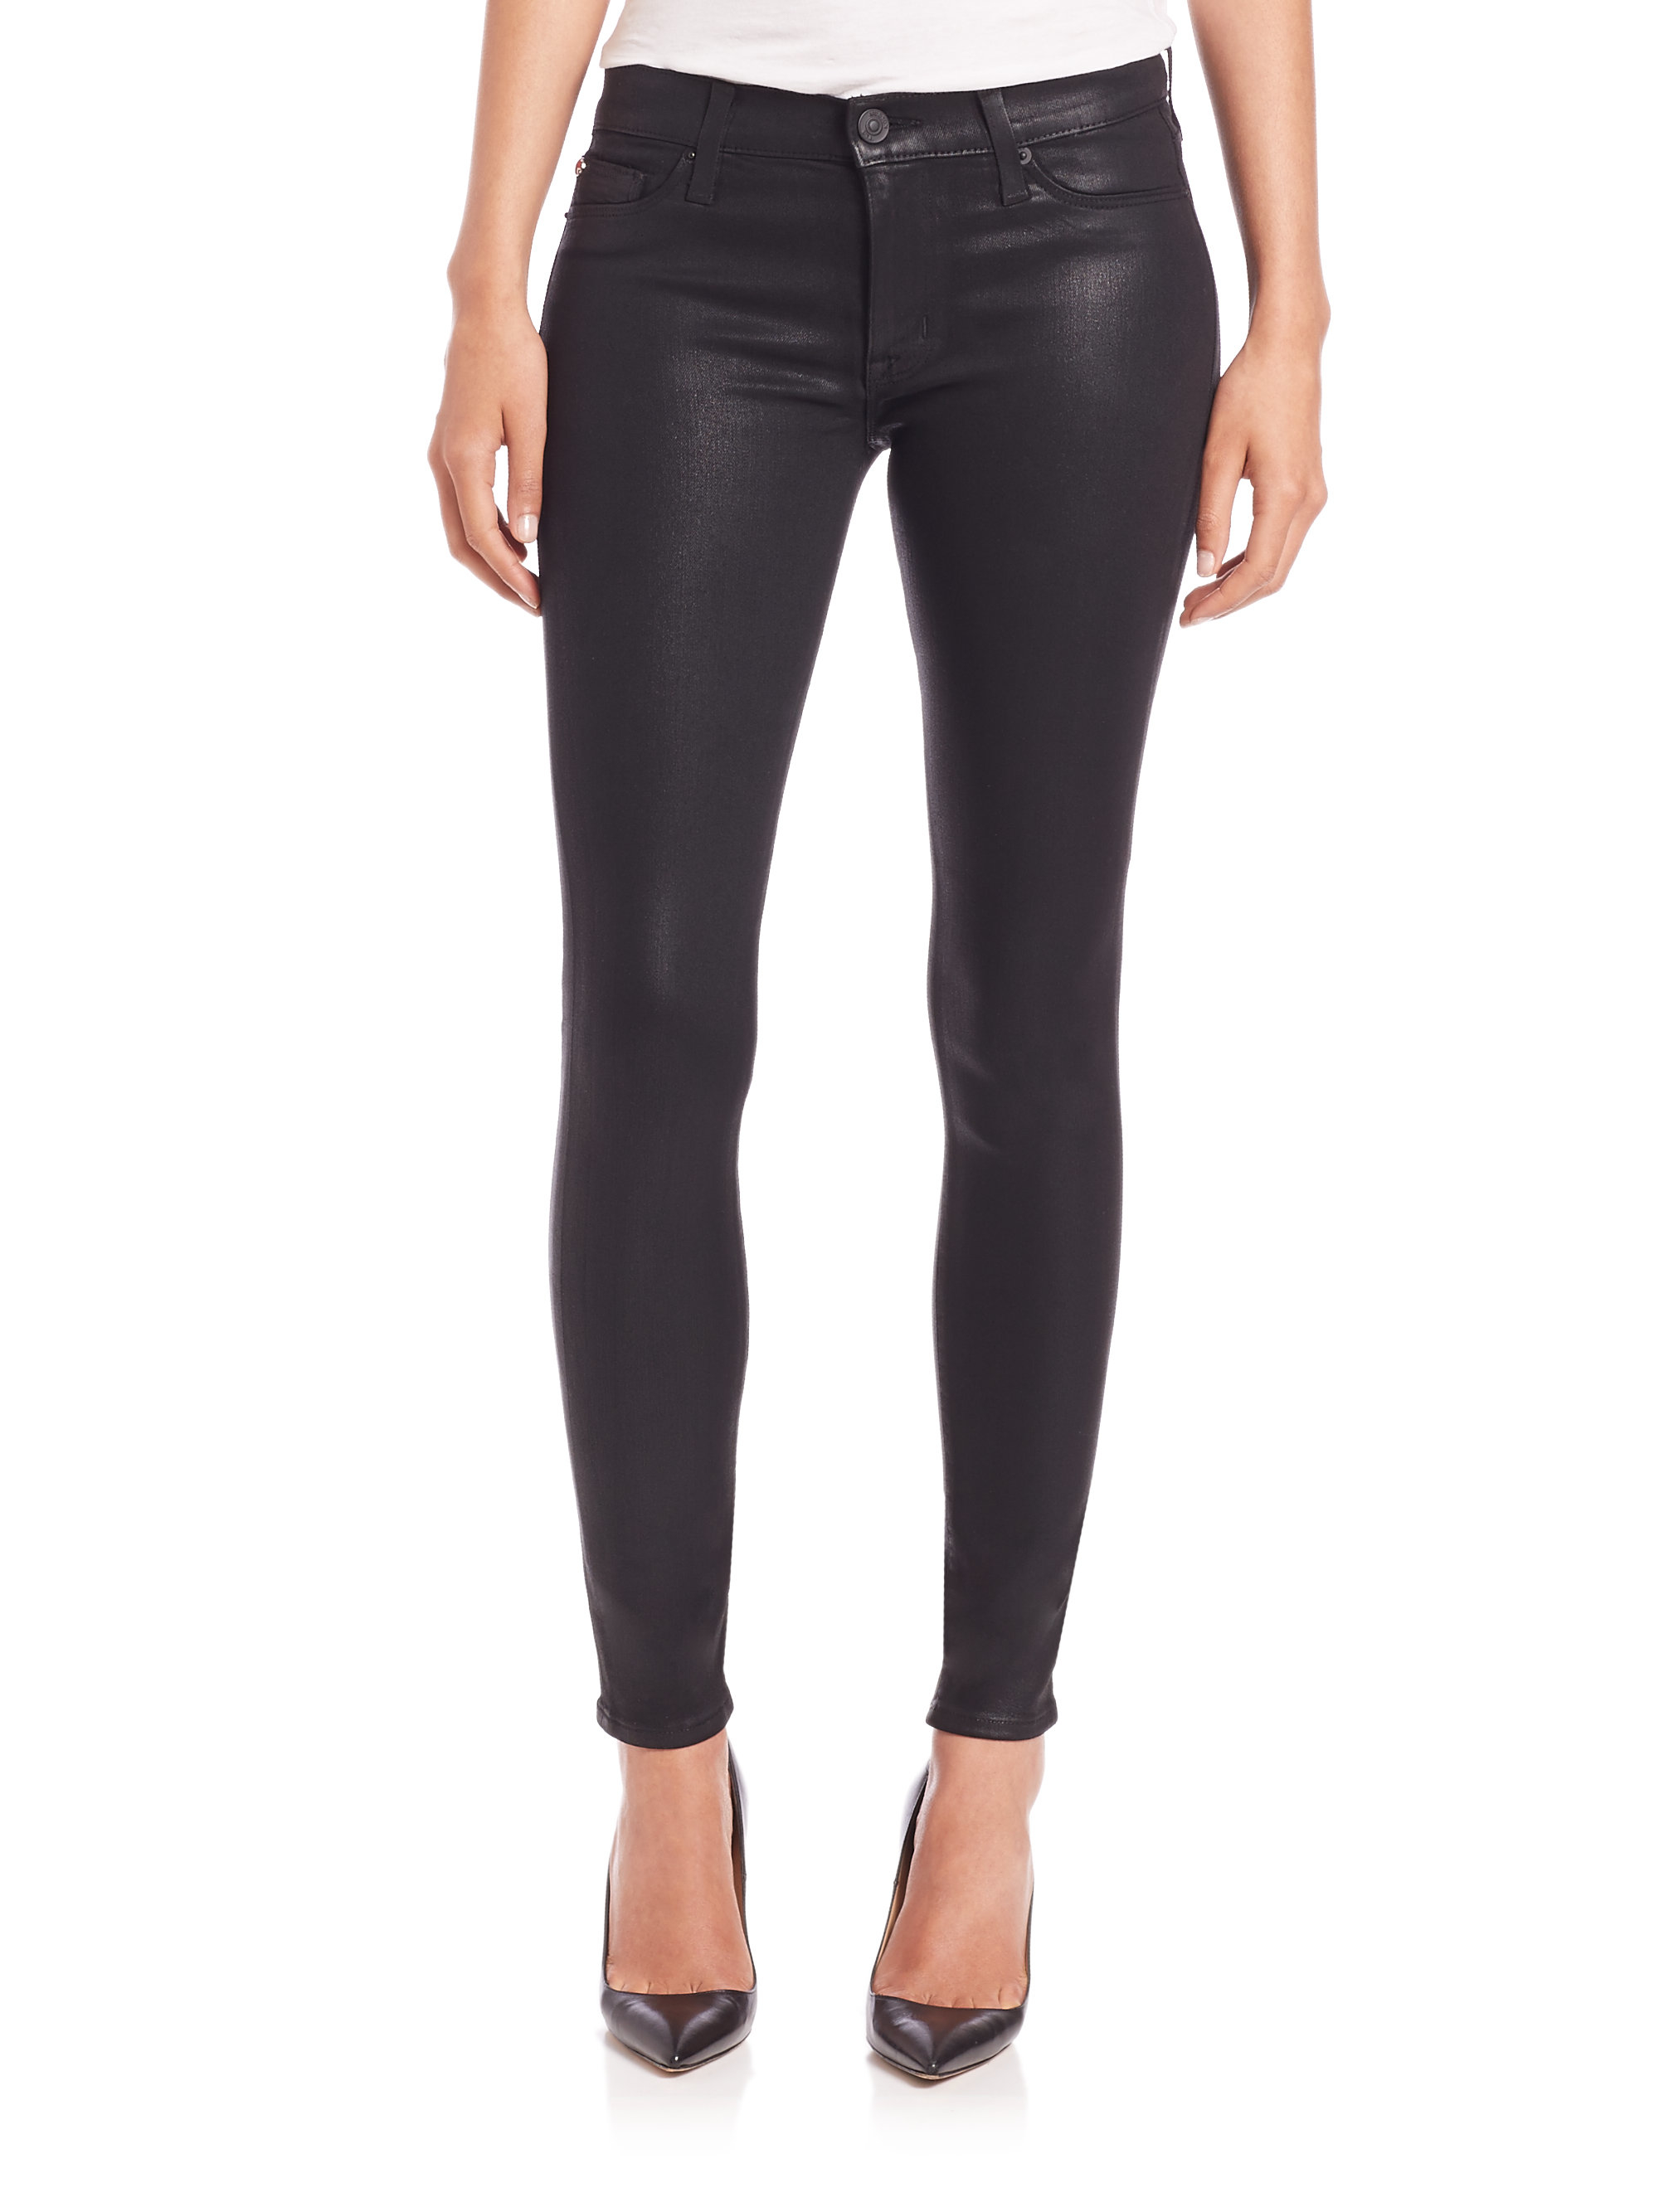 Hudson jeans Nico Coated Mid-rise Skinny Jeans in Black | Lyst